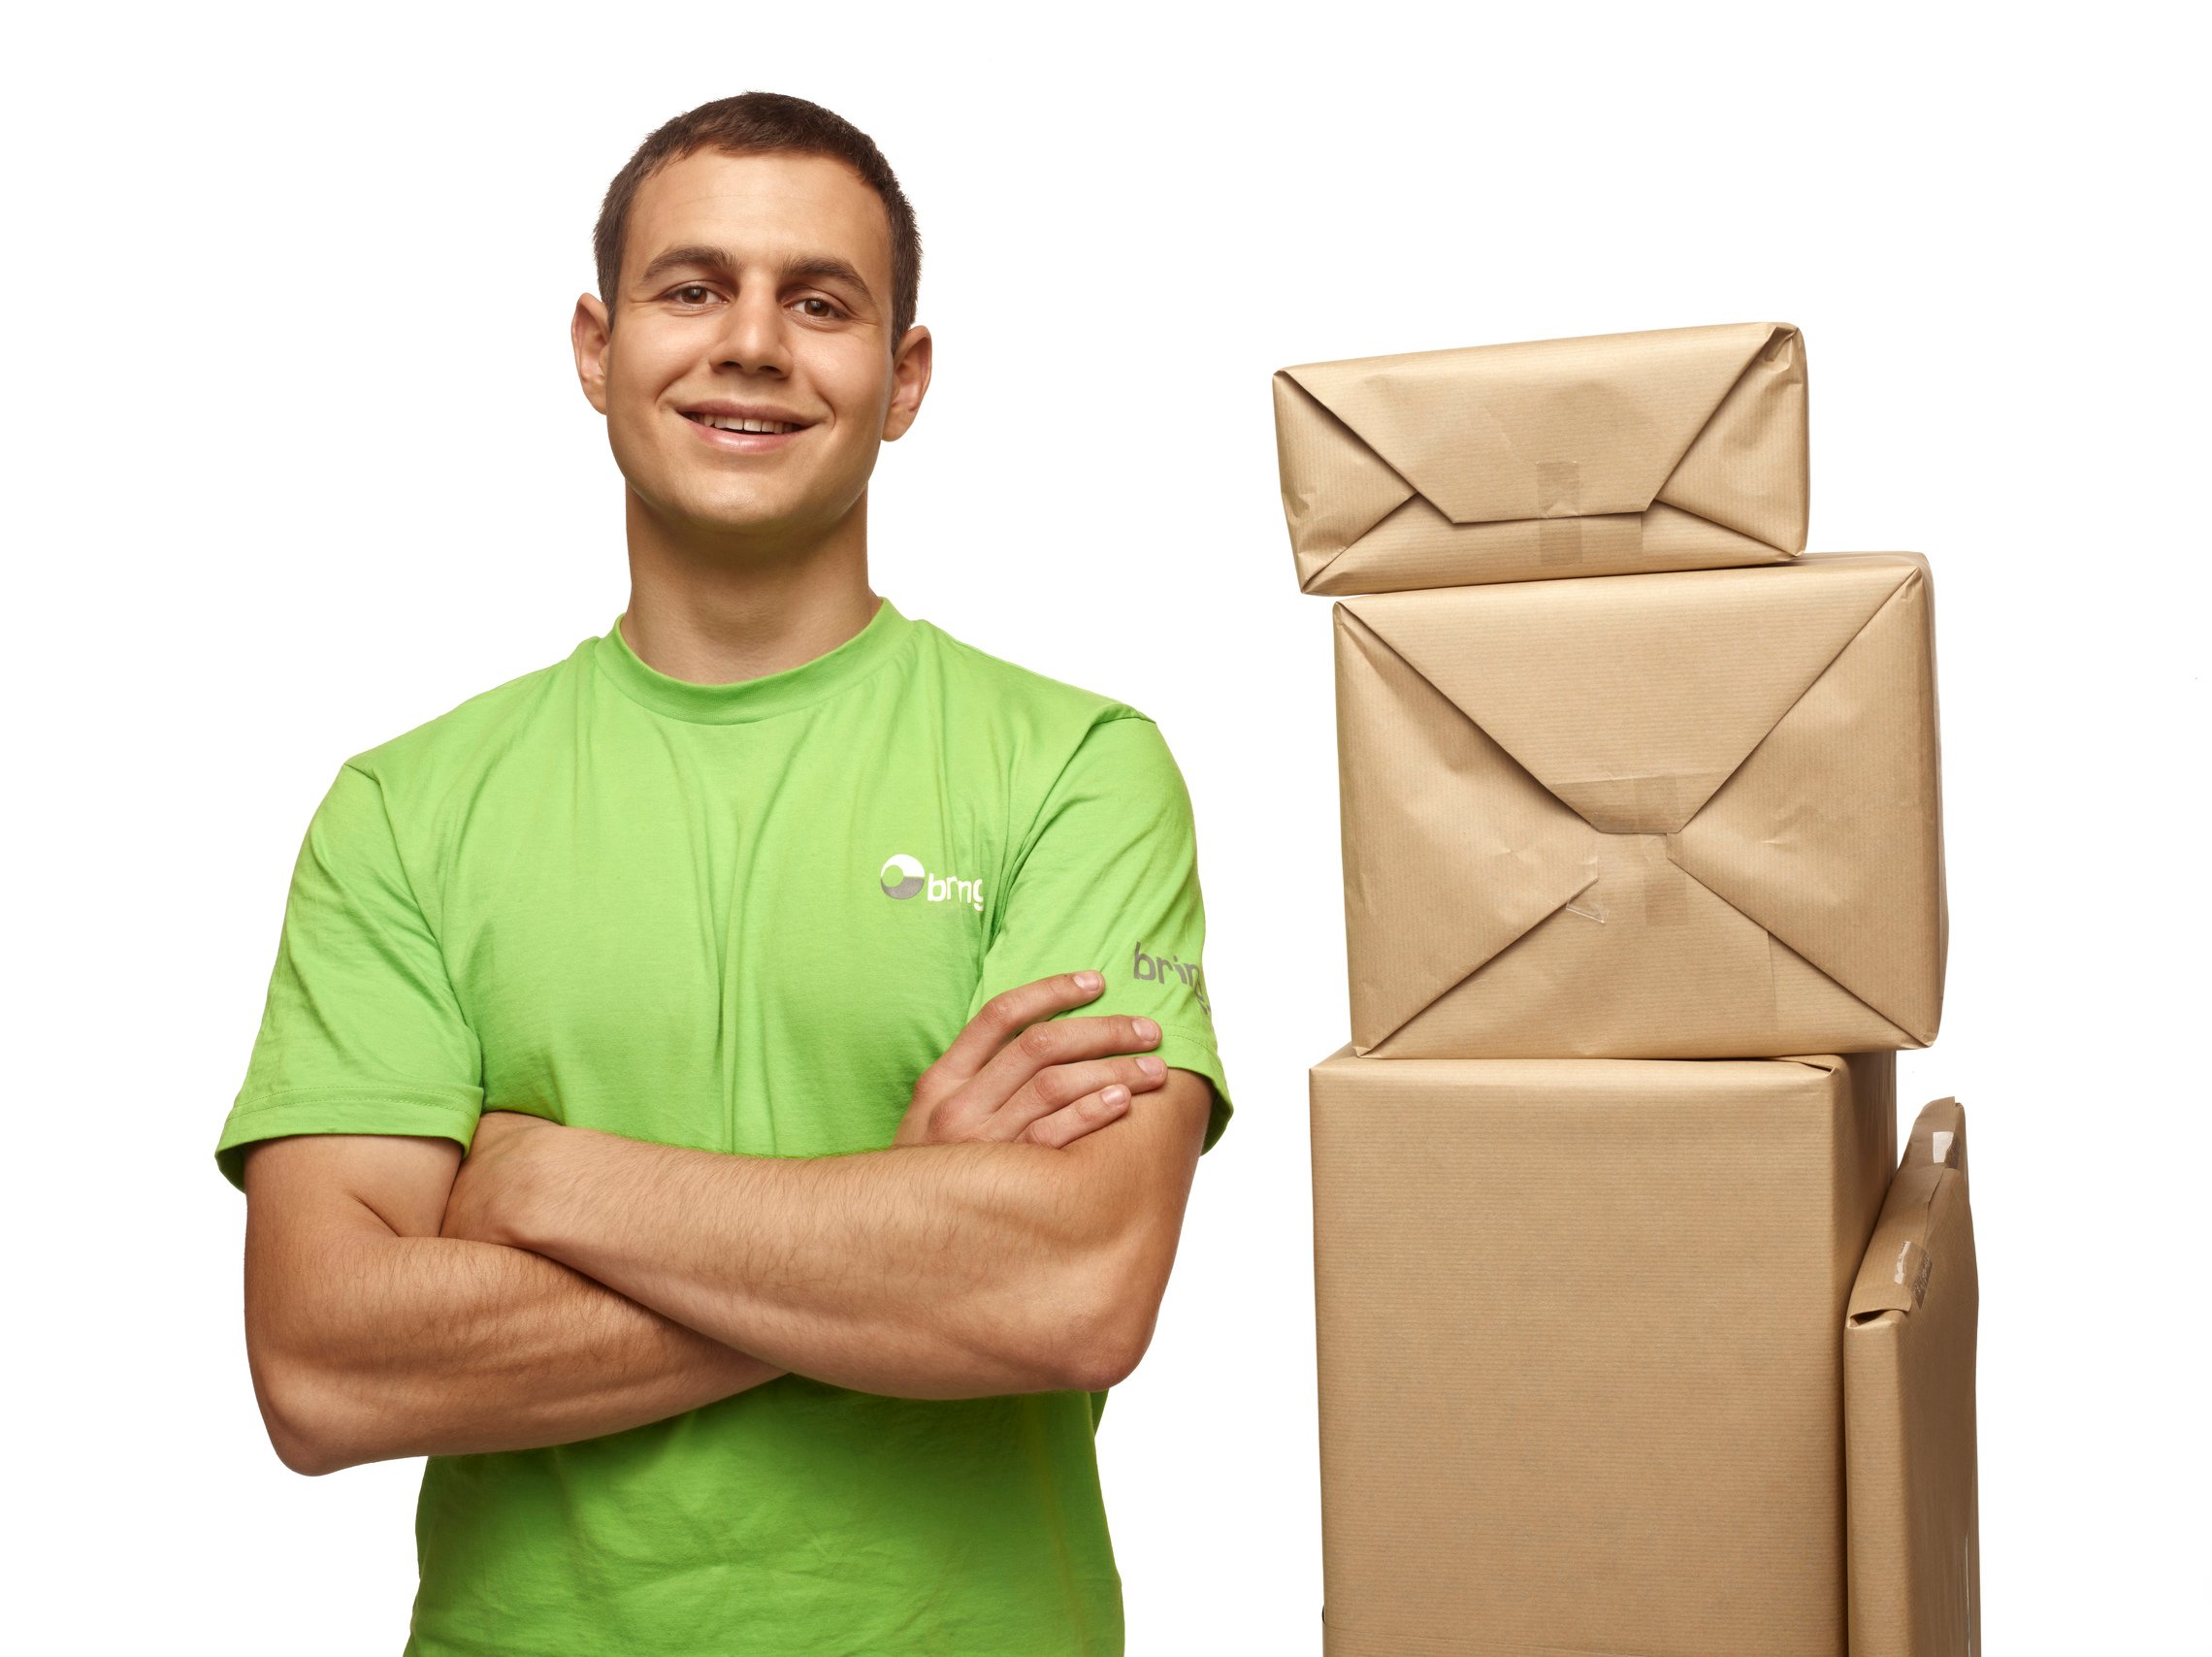 Bring employee with parcels